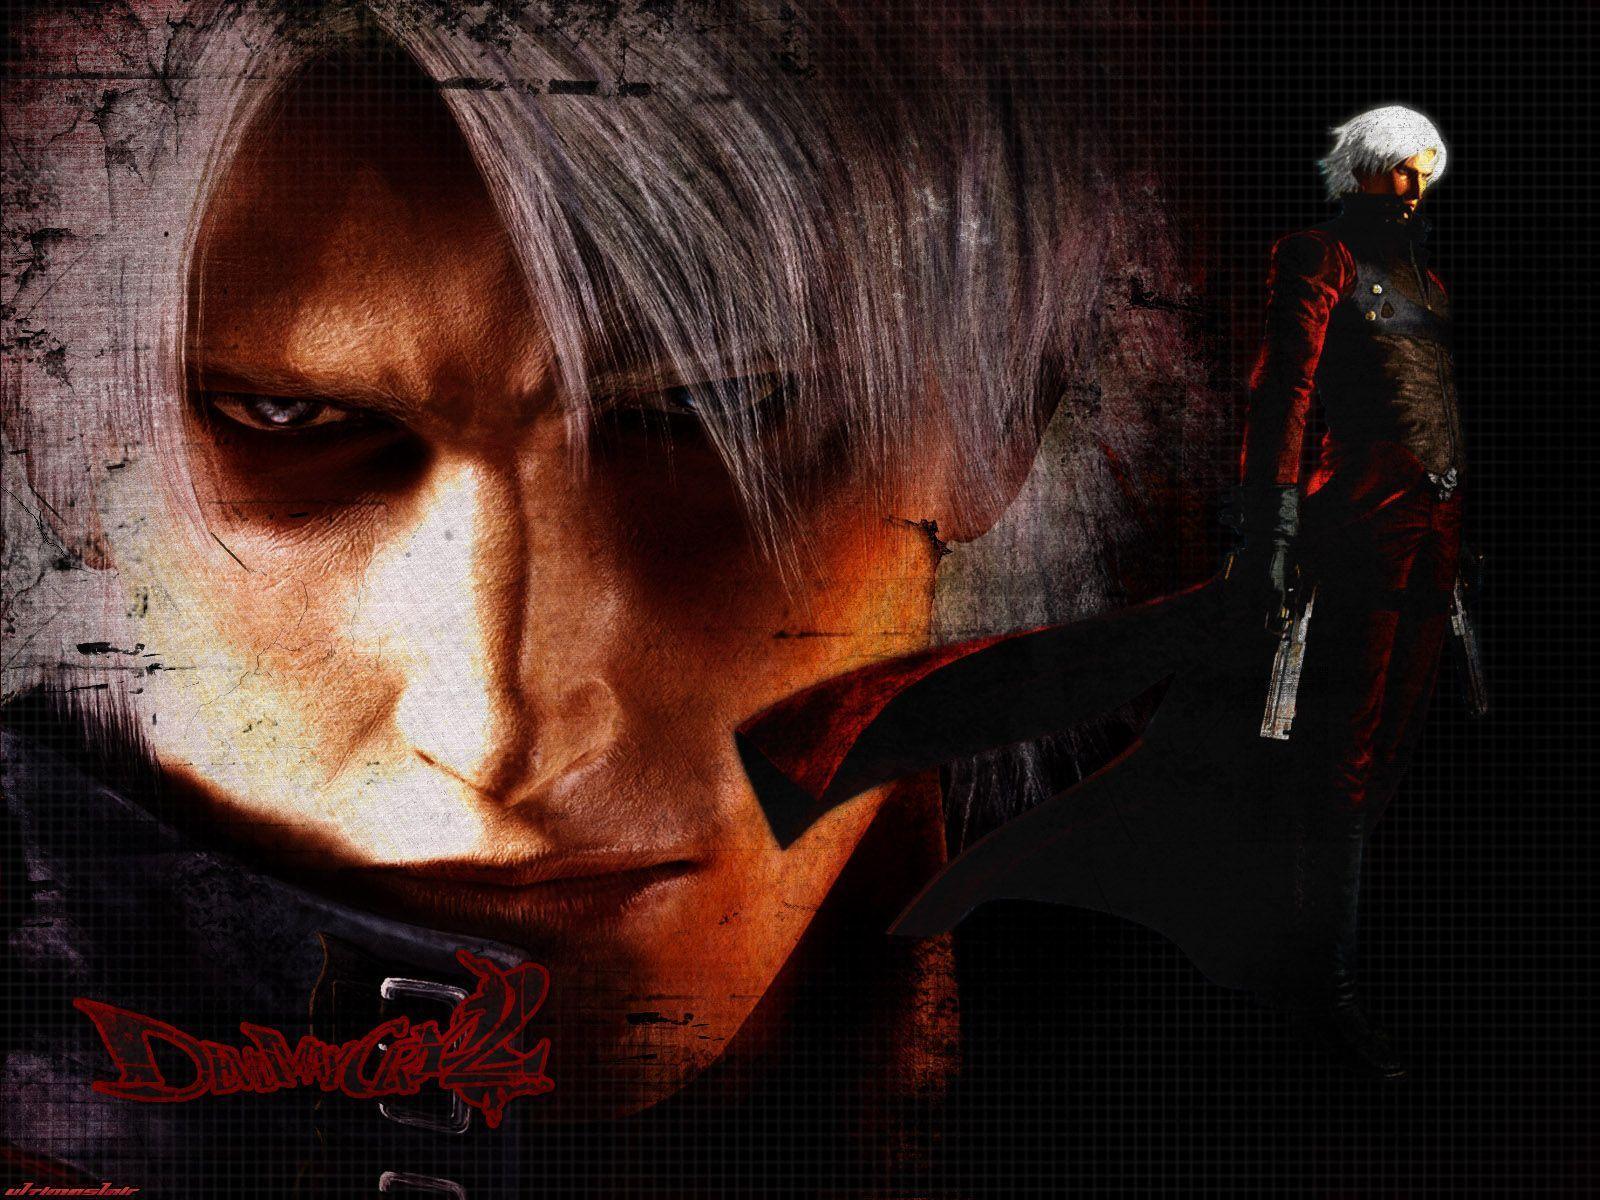 Wallpaper For > Devil May Cry 2 Wallpaper